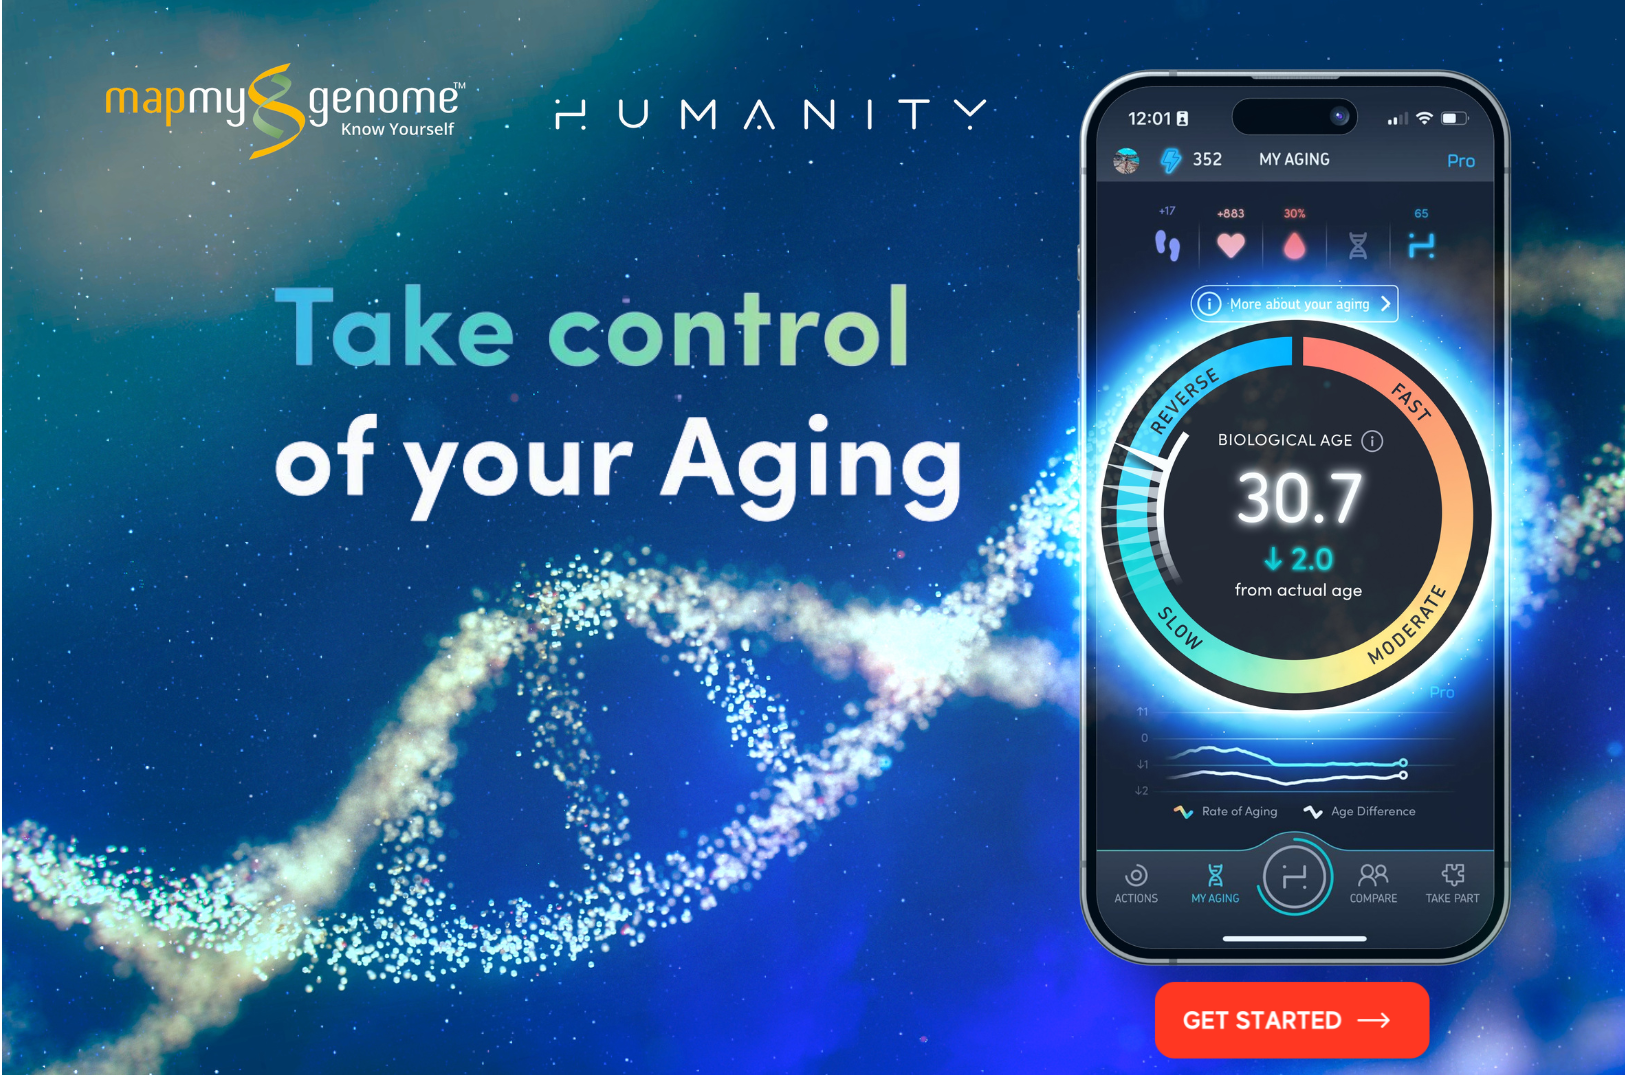 MapmyGenome and Humanity Join Forces to Revolutionize Personalized Healthcare